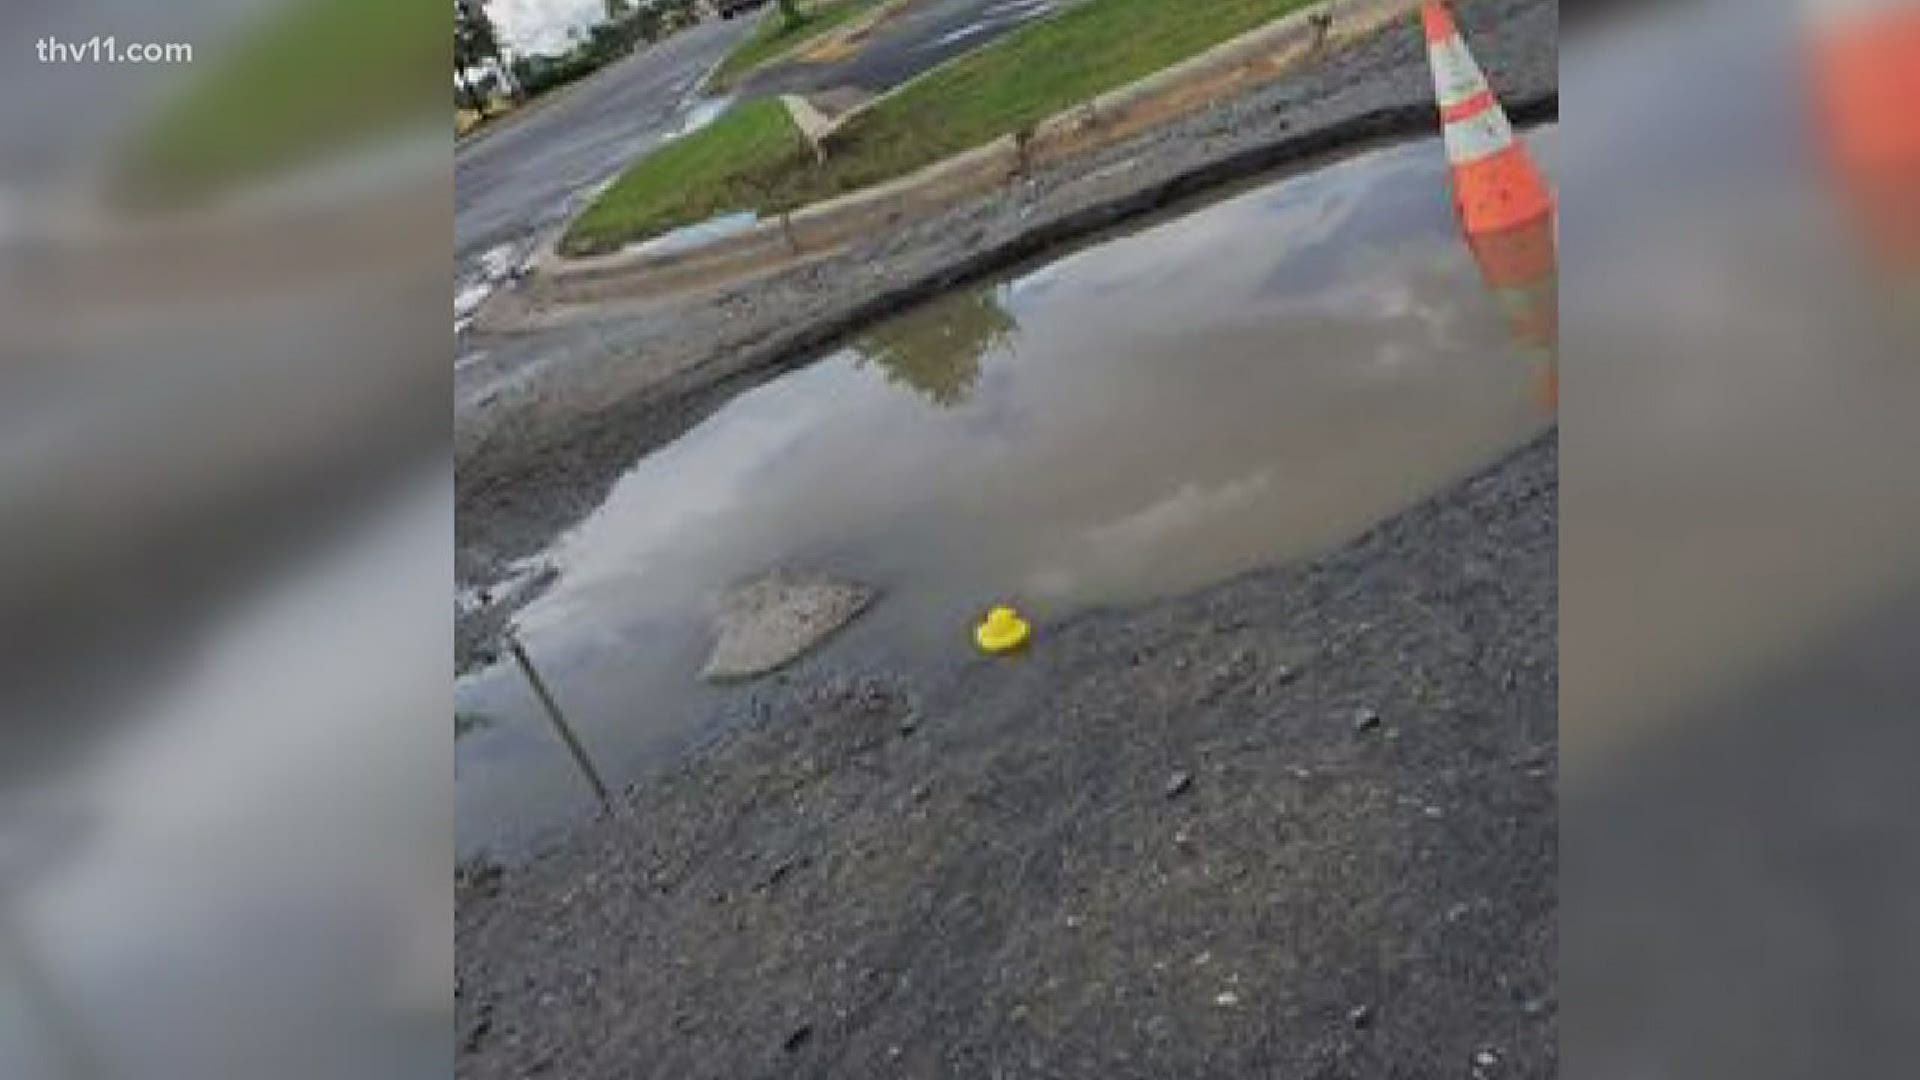 Who knew a single pot hole could get so much attention? People are going to the extremes to make sure the property owners will get it fixed.